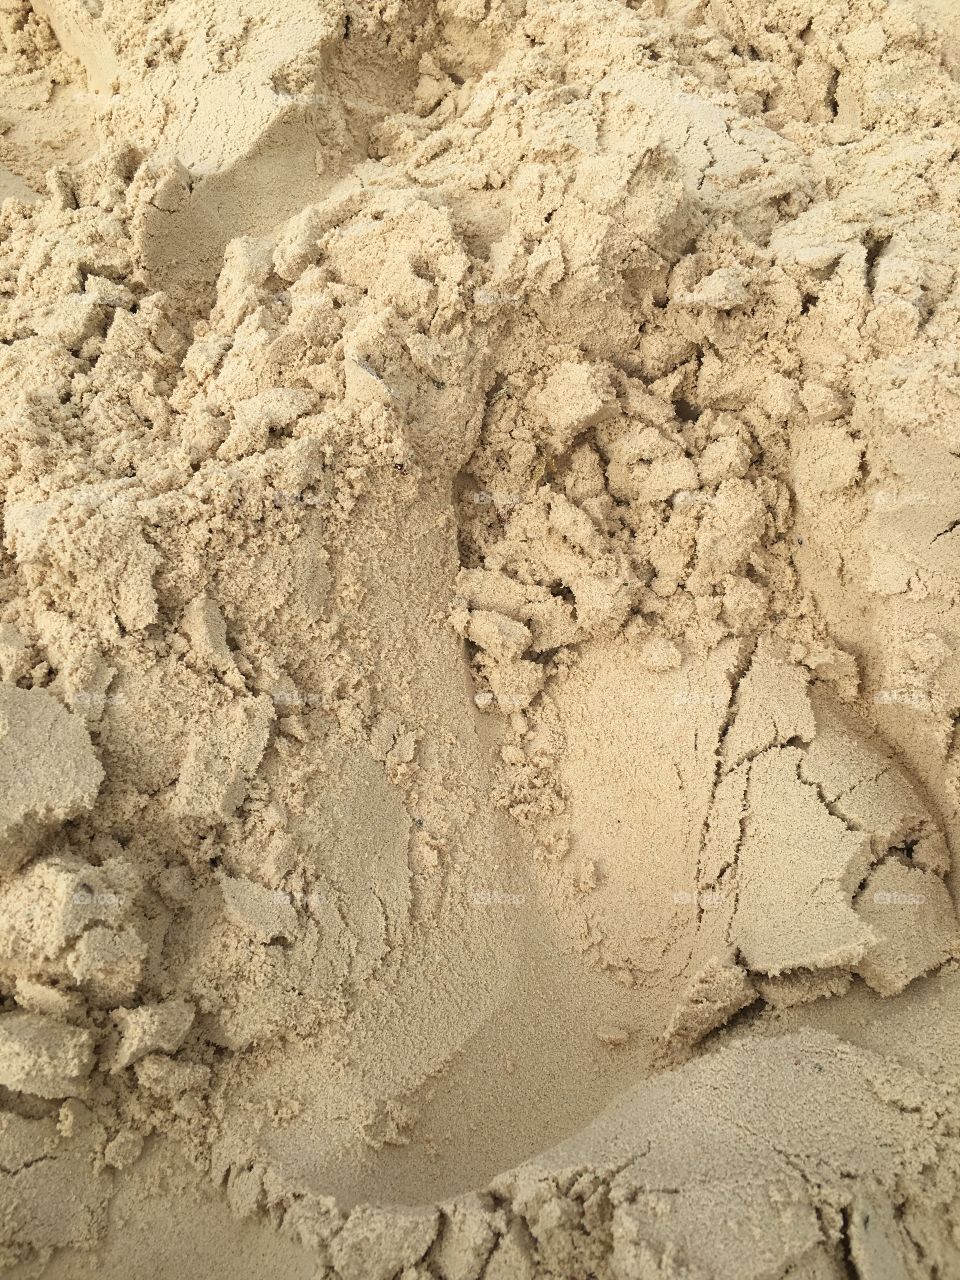 Sand in the Turks and Caicos